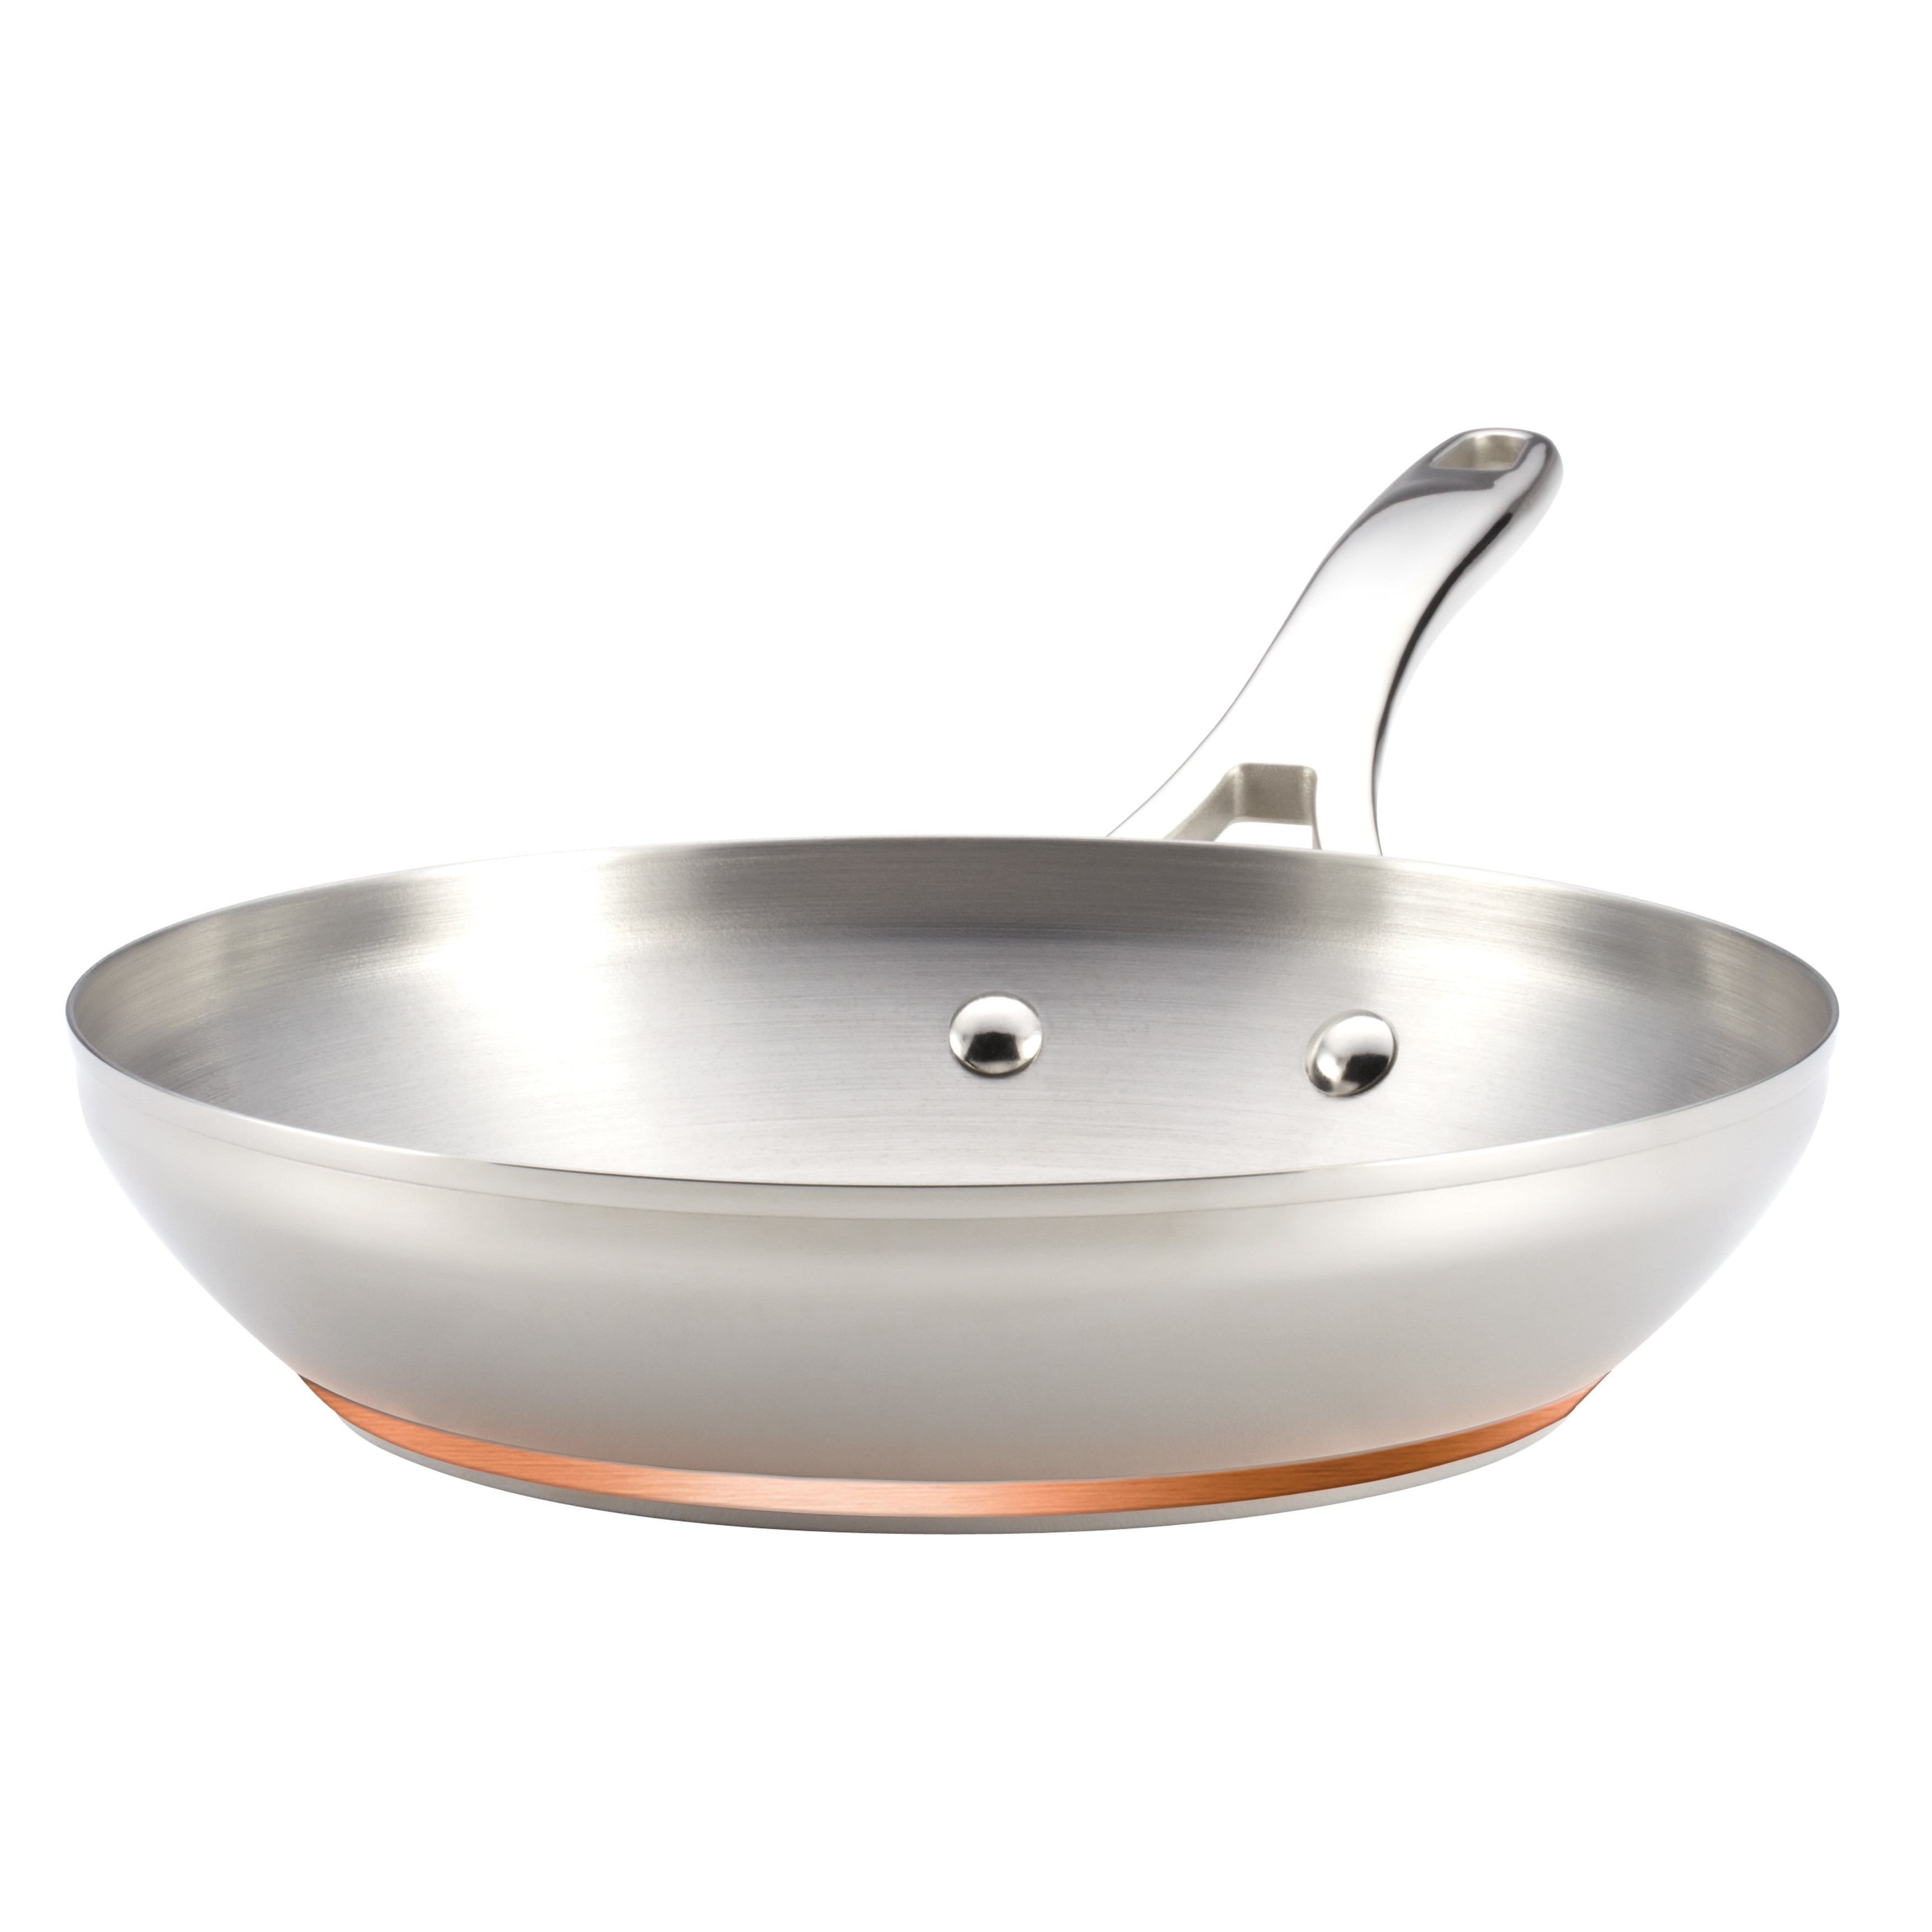 https://ak1.ostkcdn.com/images/products/12557424/Anolon-r-Nouvelle-Copper-Stainless-Steel-12-Inch-Covered-French-Skillet-3f2f97f1-11c0-489f-9426-c1740026821a.jpg